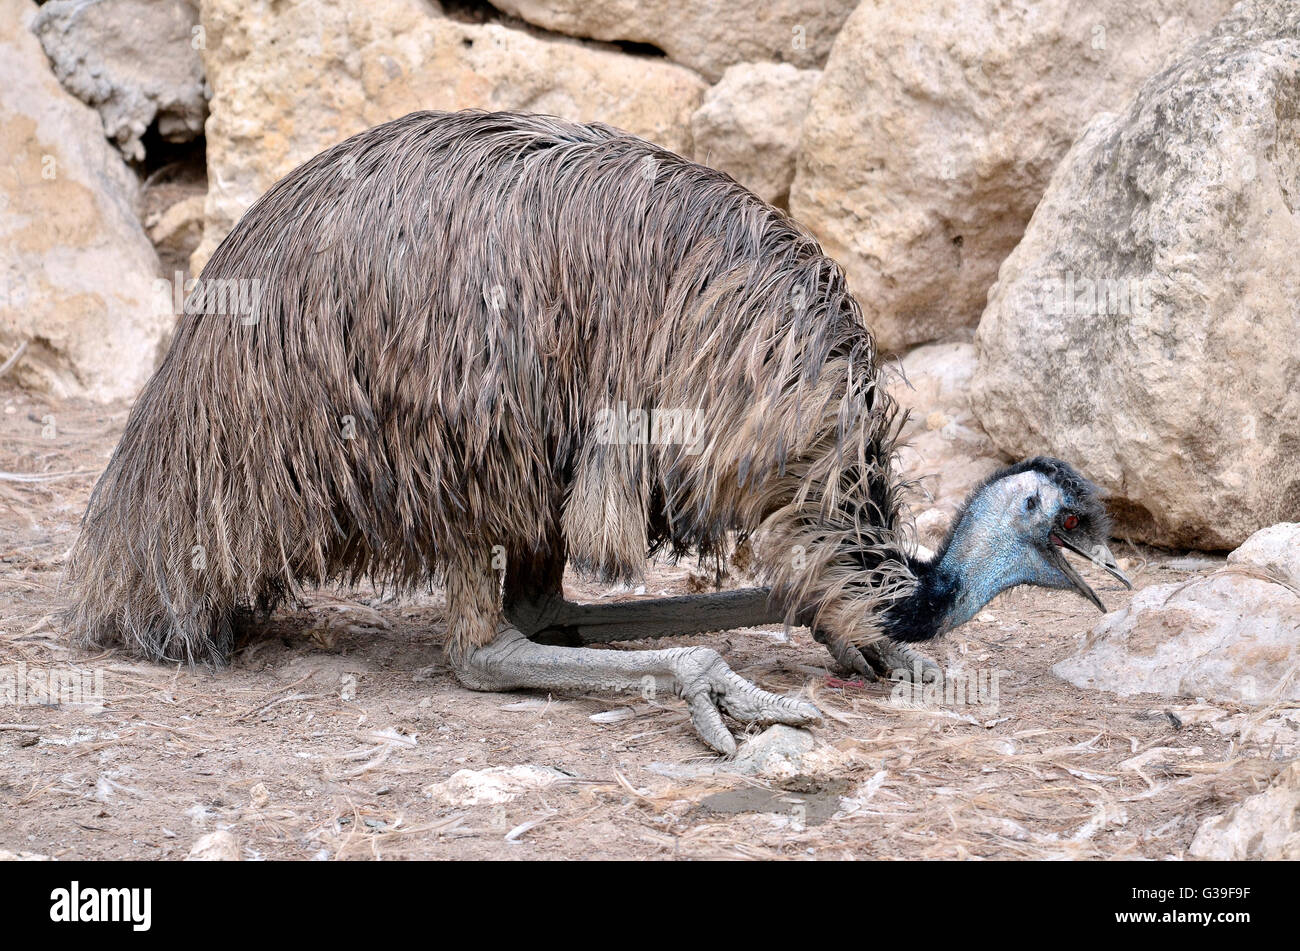 Emu (Dromaius novaehollandiae) lying on the ground in front of the rocks seen from profile Stock Photo